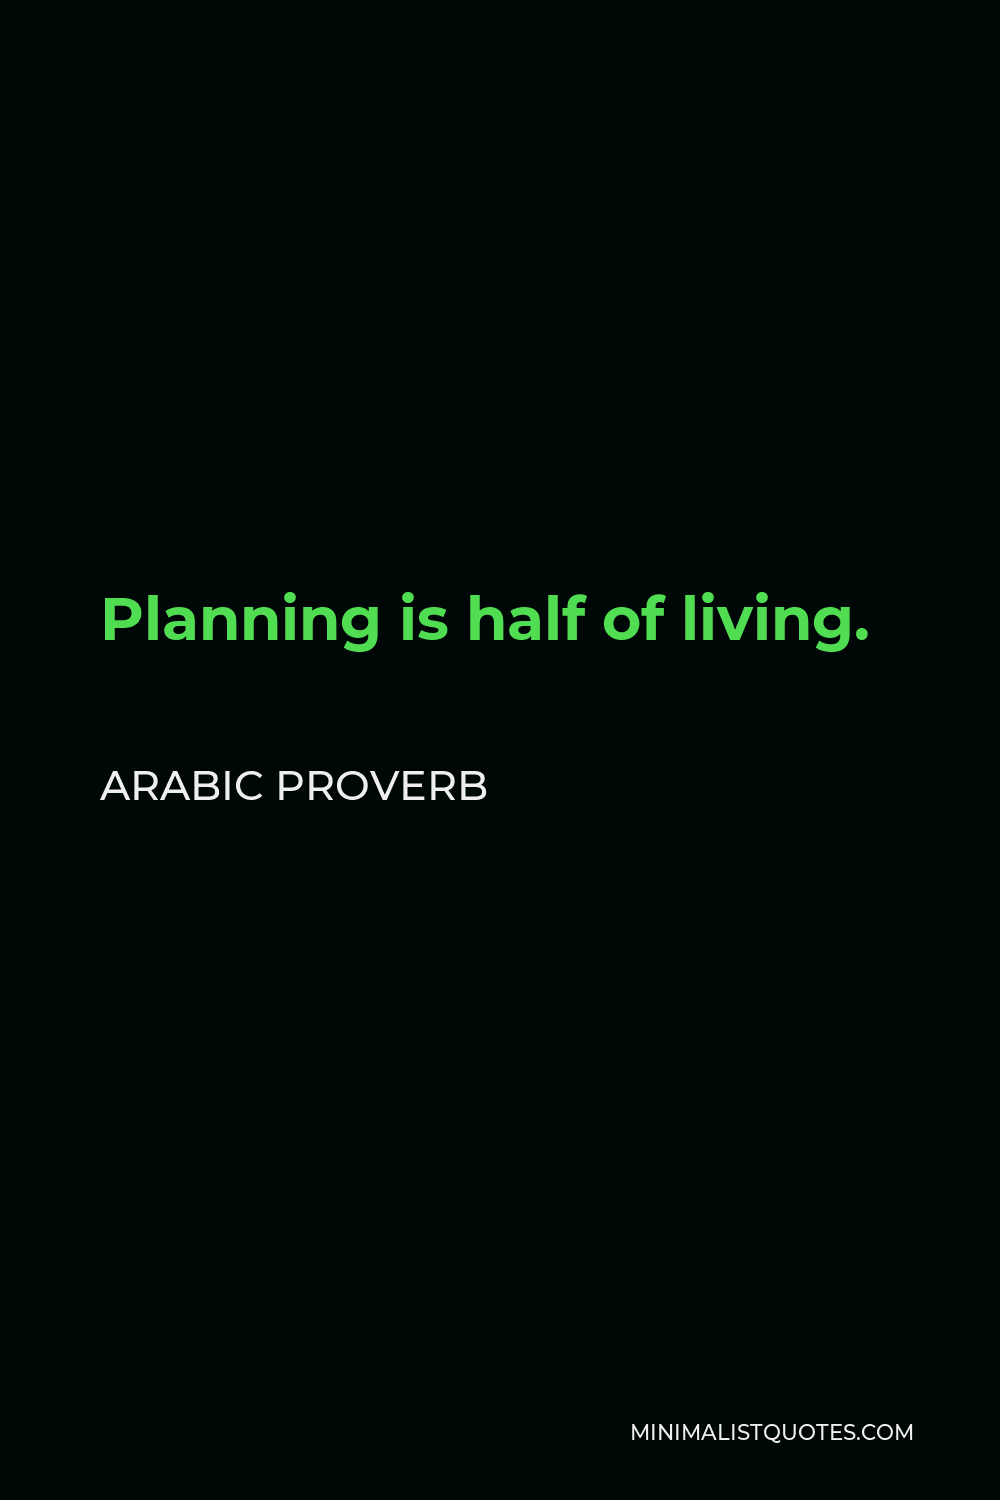 Arabic Proverb Quote - Planning is half of living.